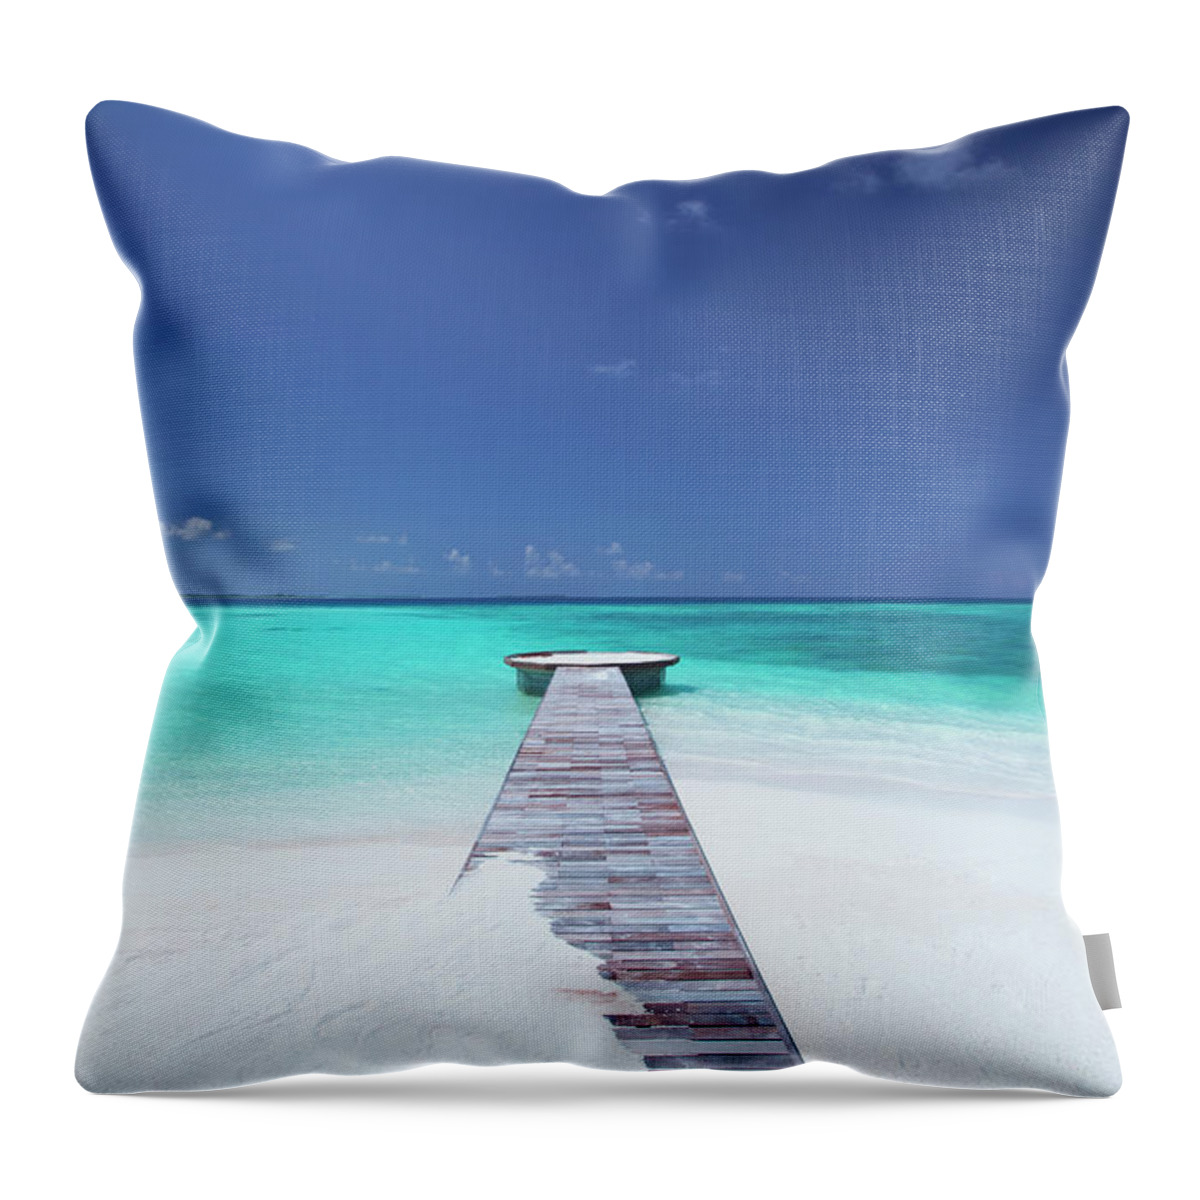 Water's Edge Throw Pillow featuring the photograph Jetty Leading To Ocean, Maldives by Sakis Papadopoulos